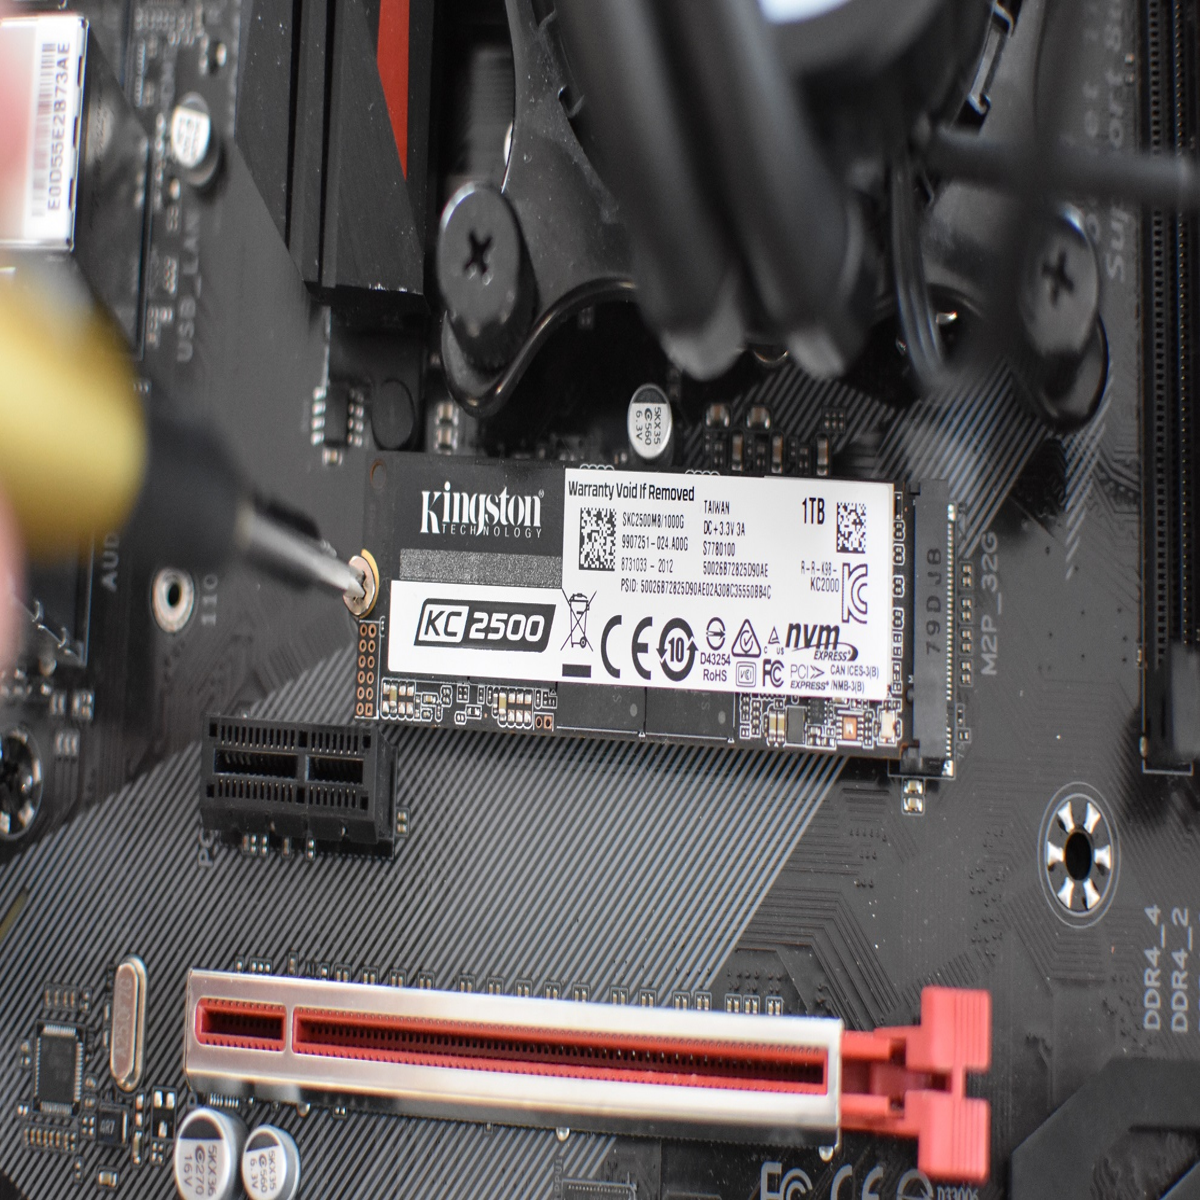 How to Install & Format your M.2 NVMe SSD